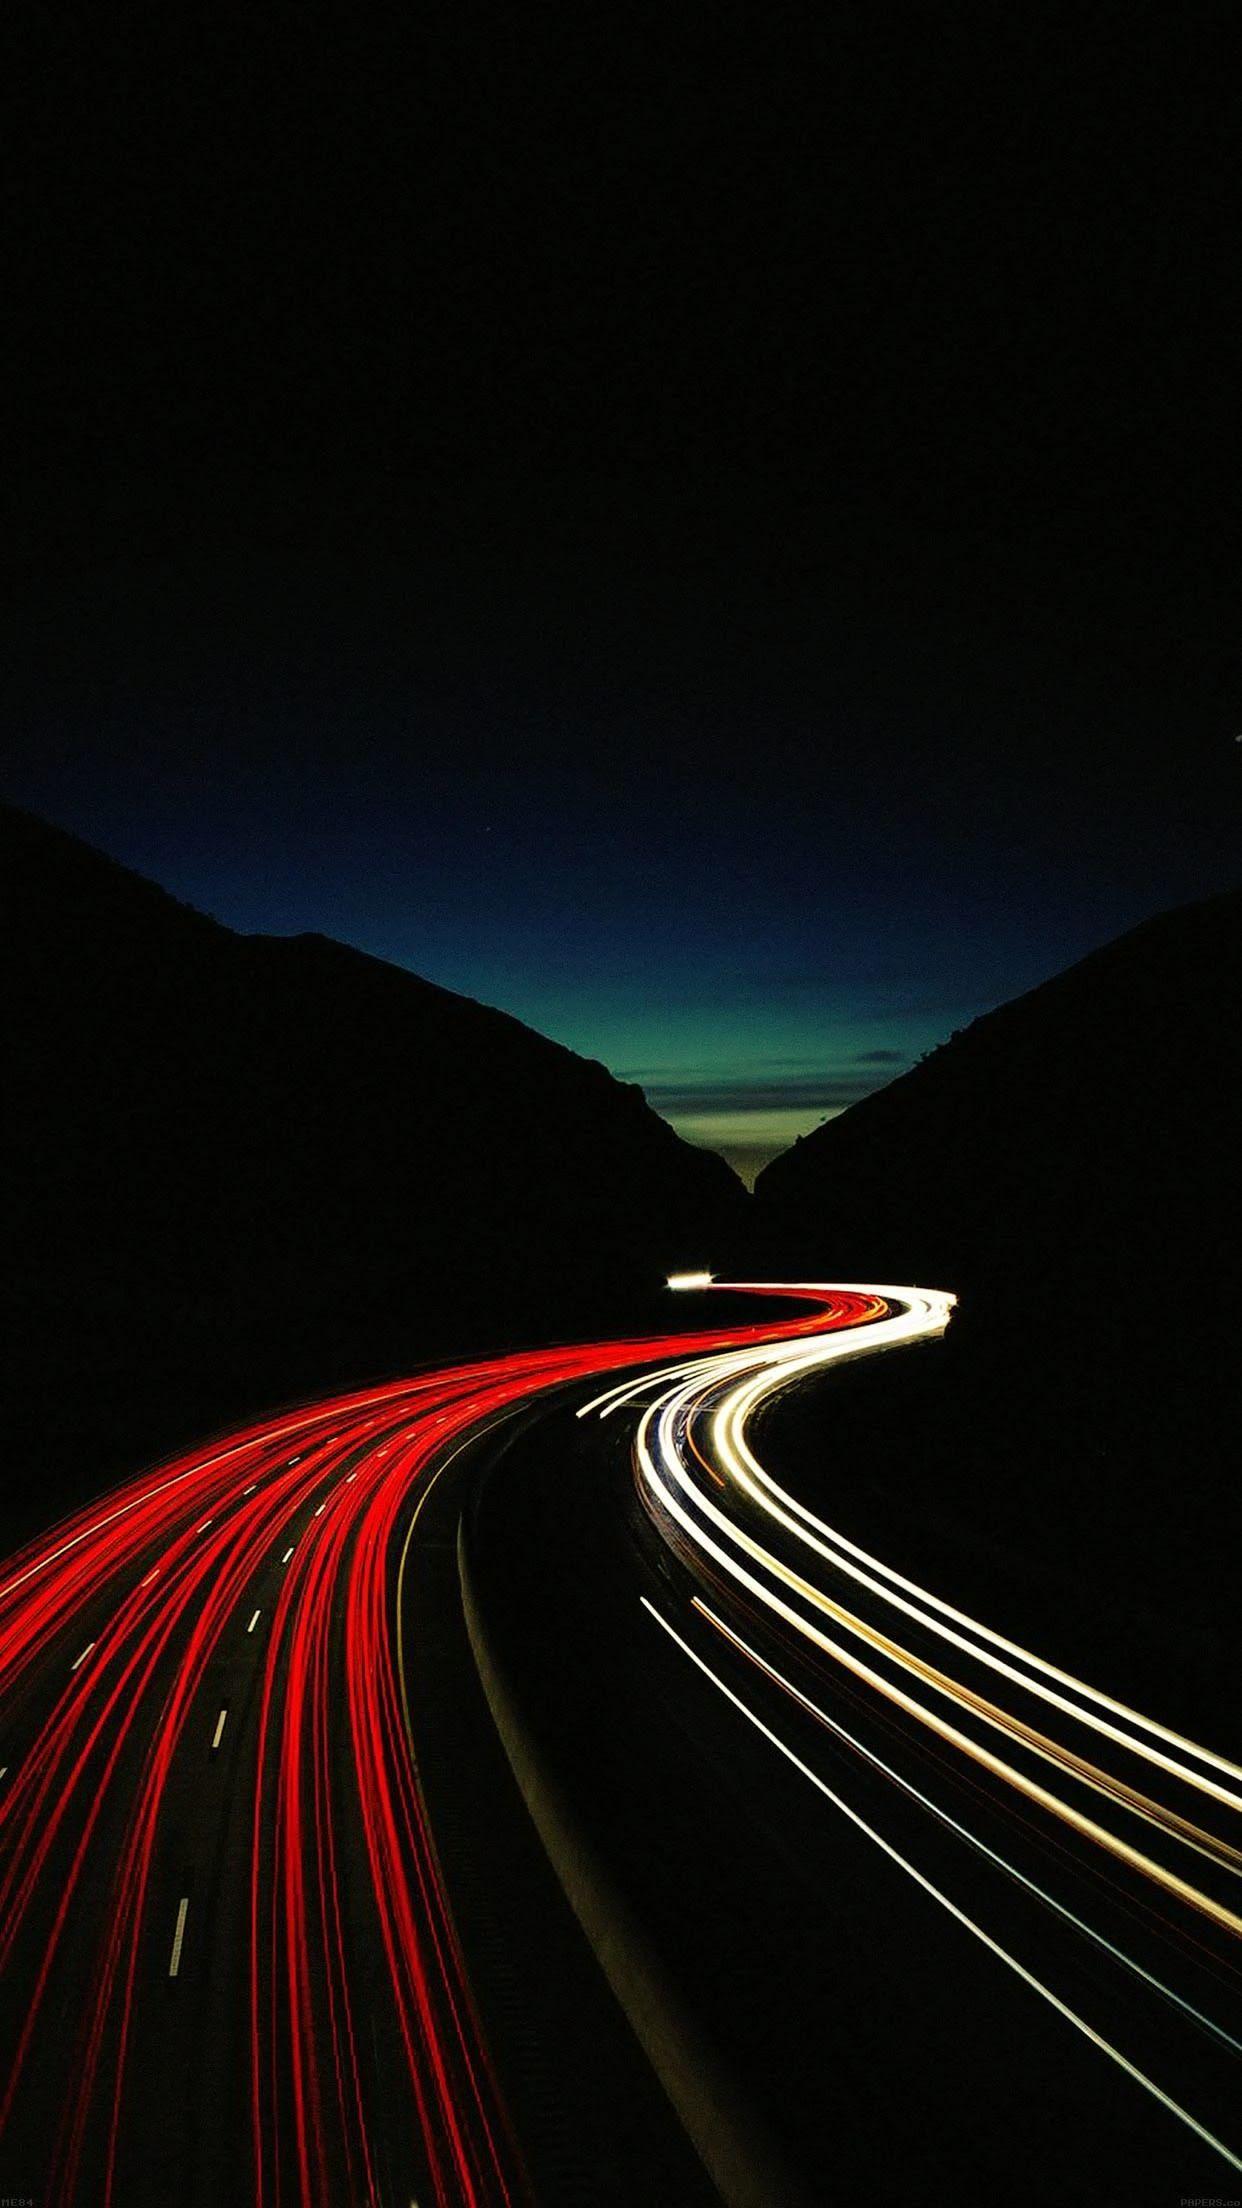 Wallpaper of long exposure Night Photography View of Vehicle